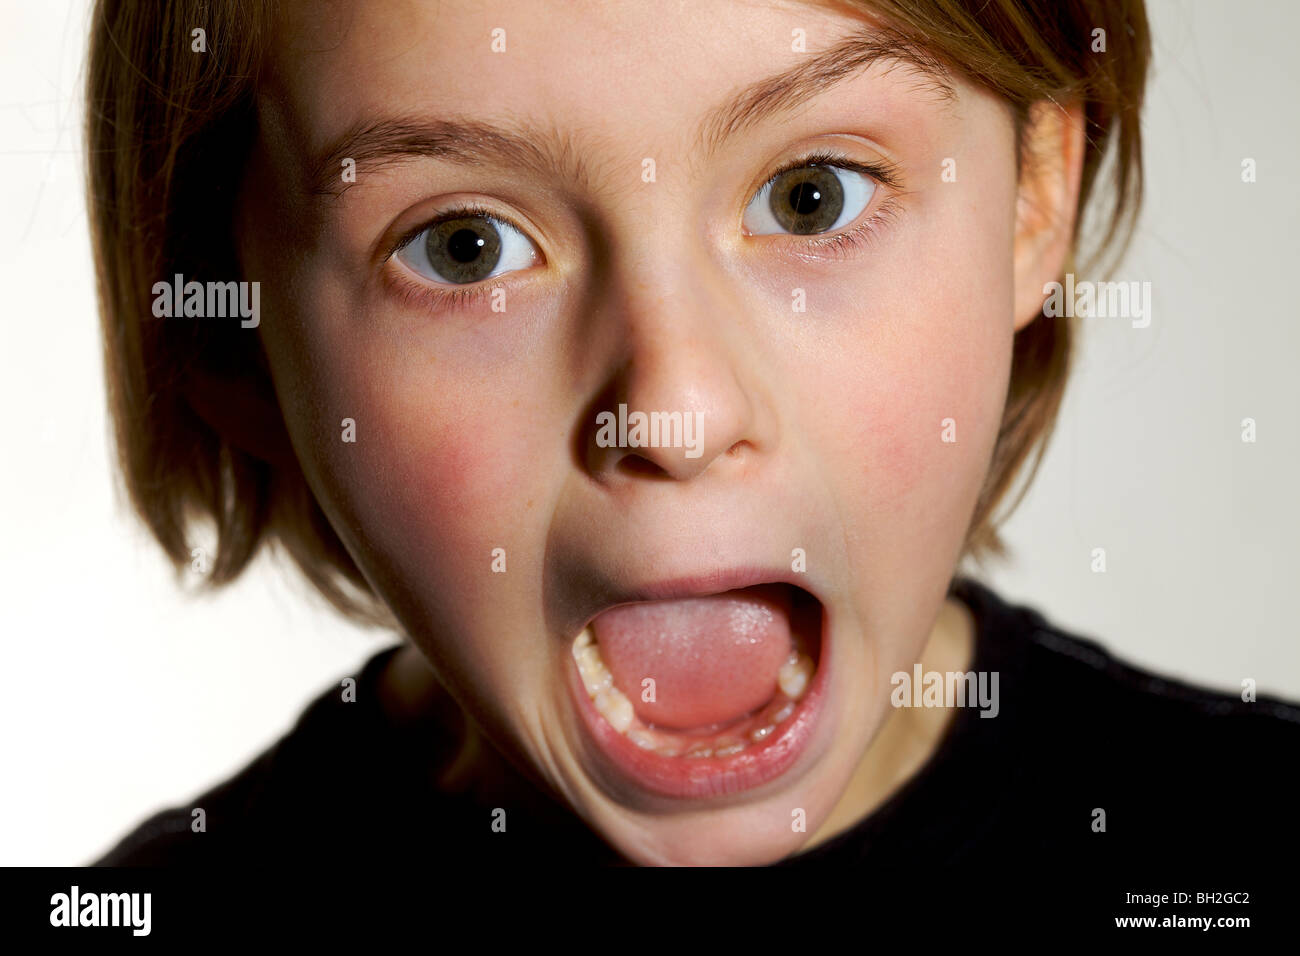 Young girl shouting screaming shocked alarmed scared surprised quizzical pull a face Stock Photo